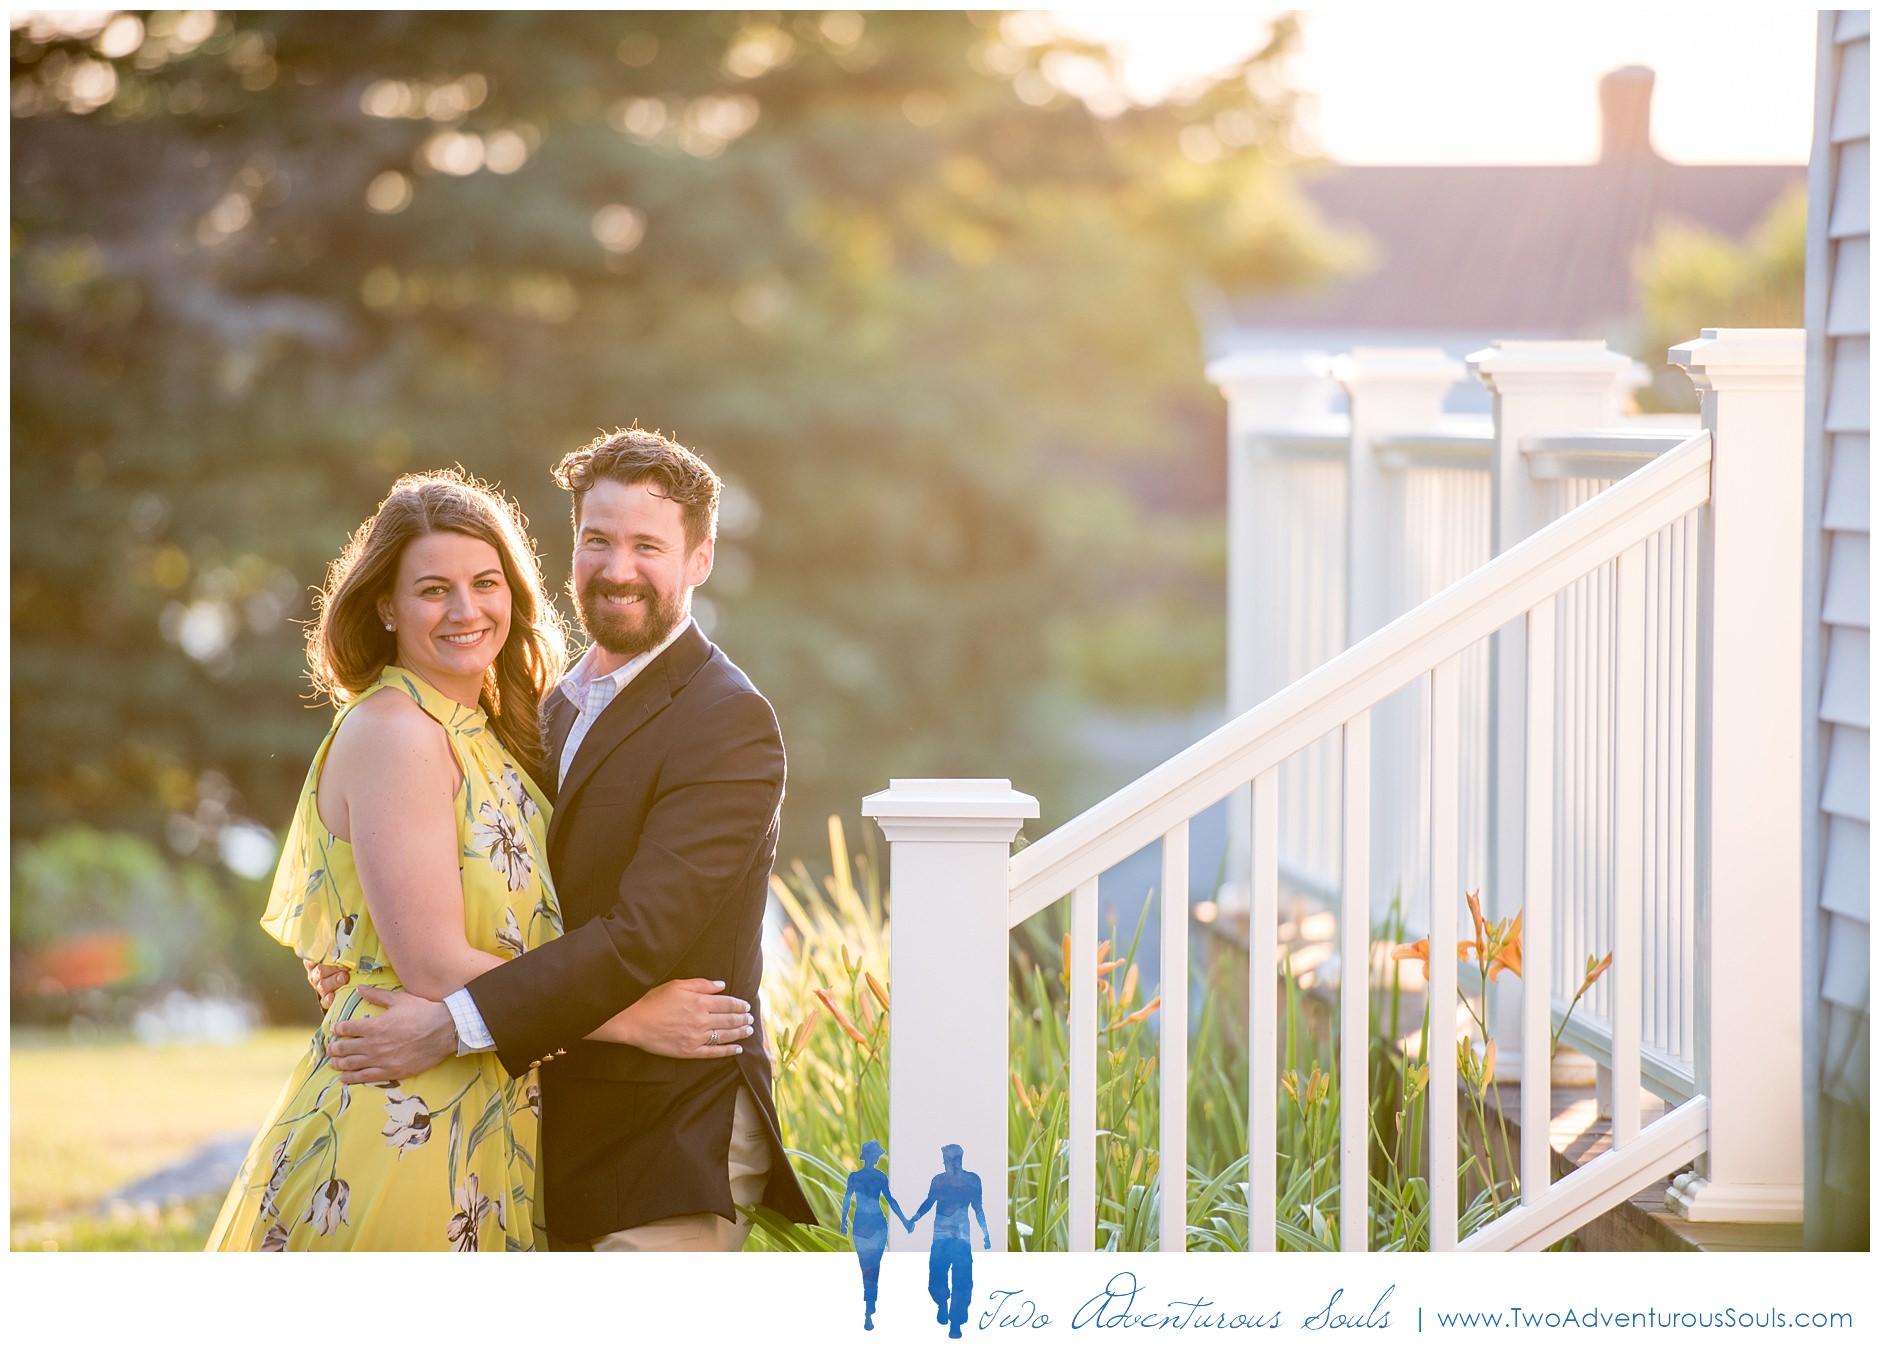 070818 - Leanne & Tyler - engaged-29_Boothbay Harbor Wedding Photographers, Boothbay Engagement Session.jpg